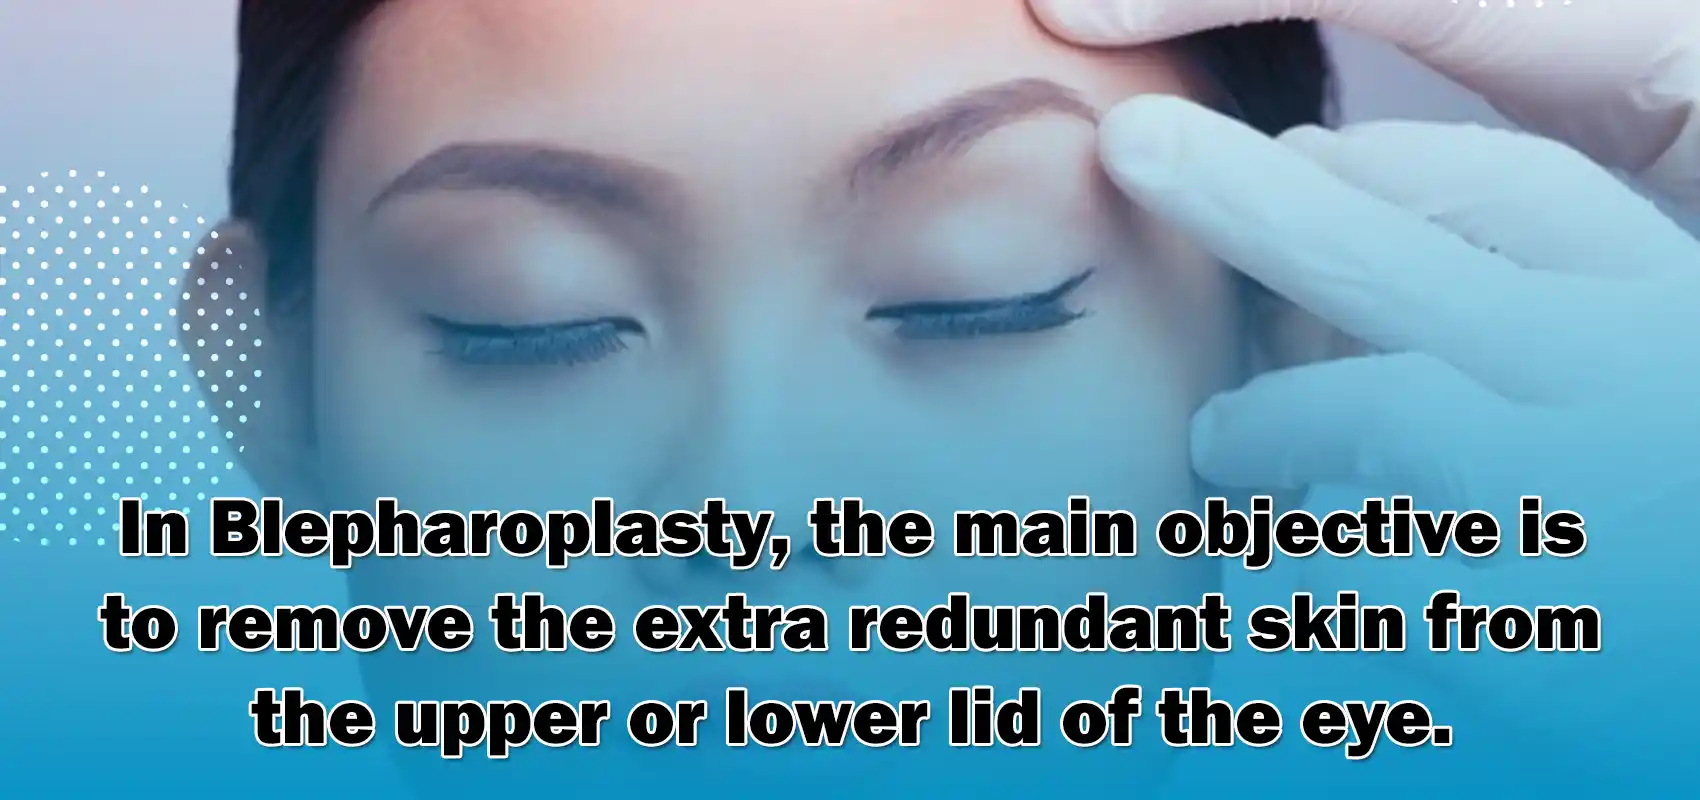 In Blepharoplasty, the main objective is to remove the extra redundant skin from the upper or lower lid of the eye